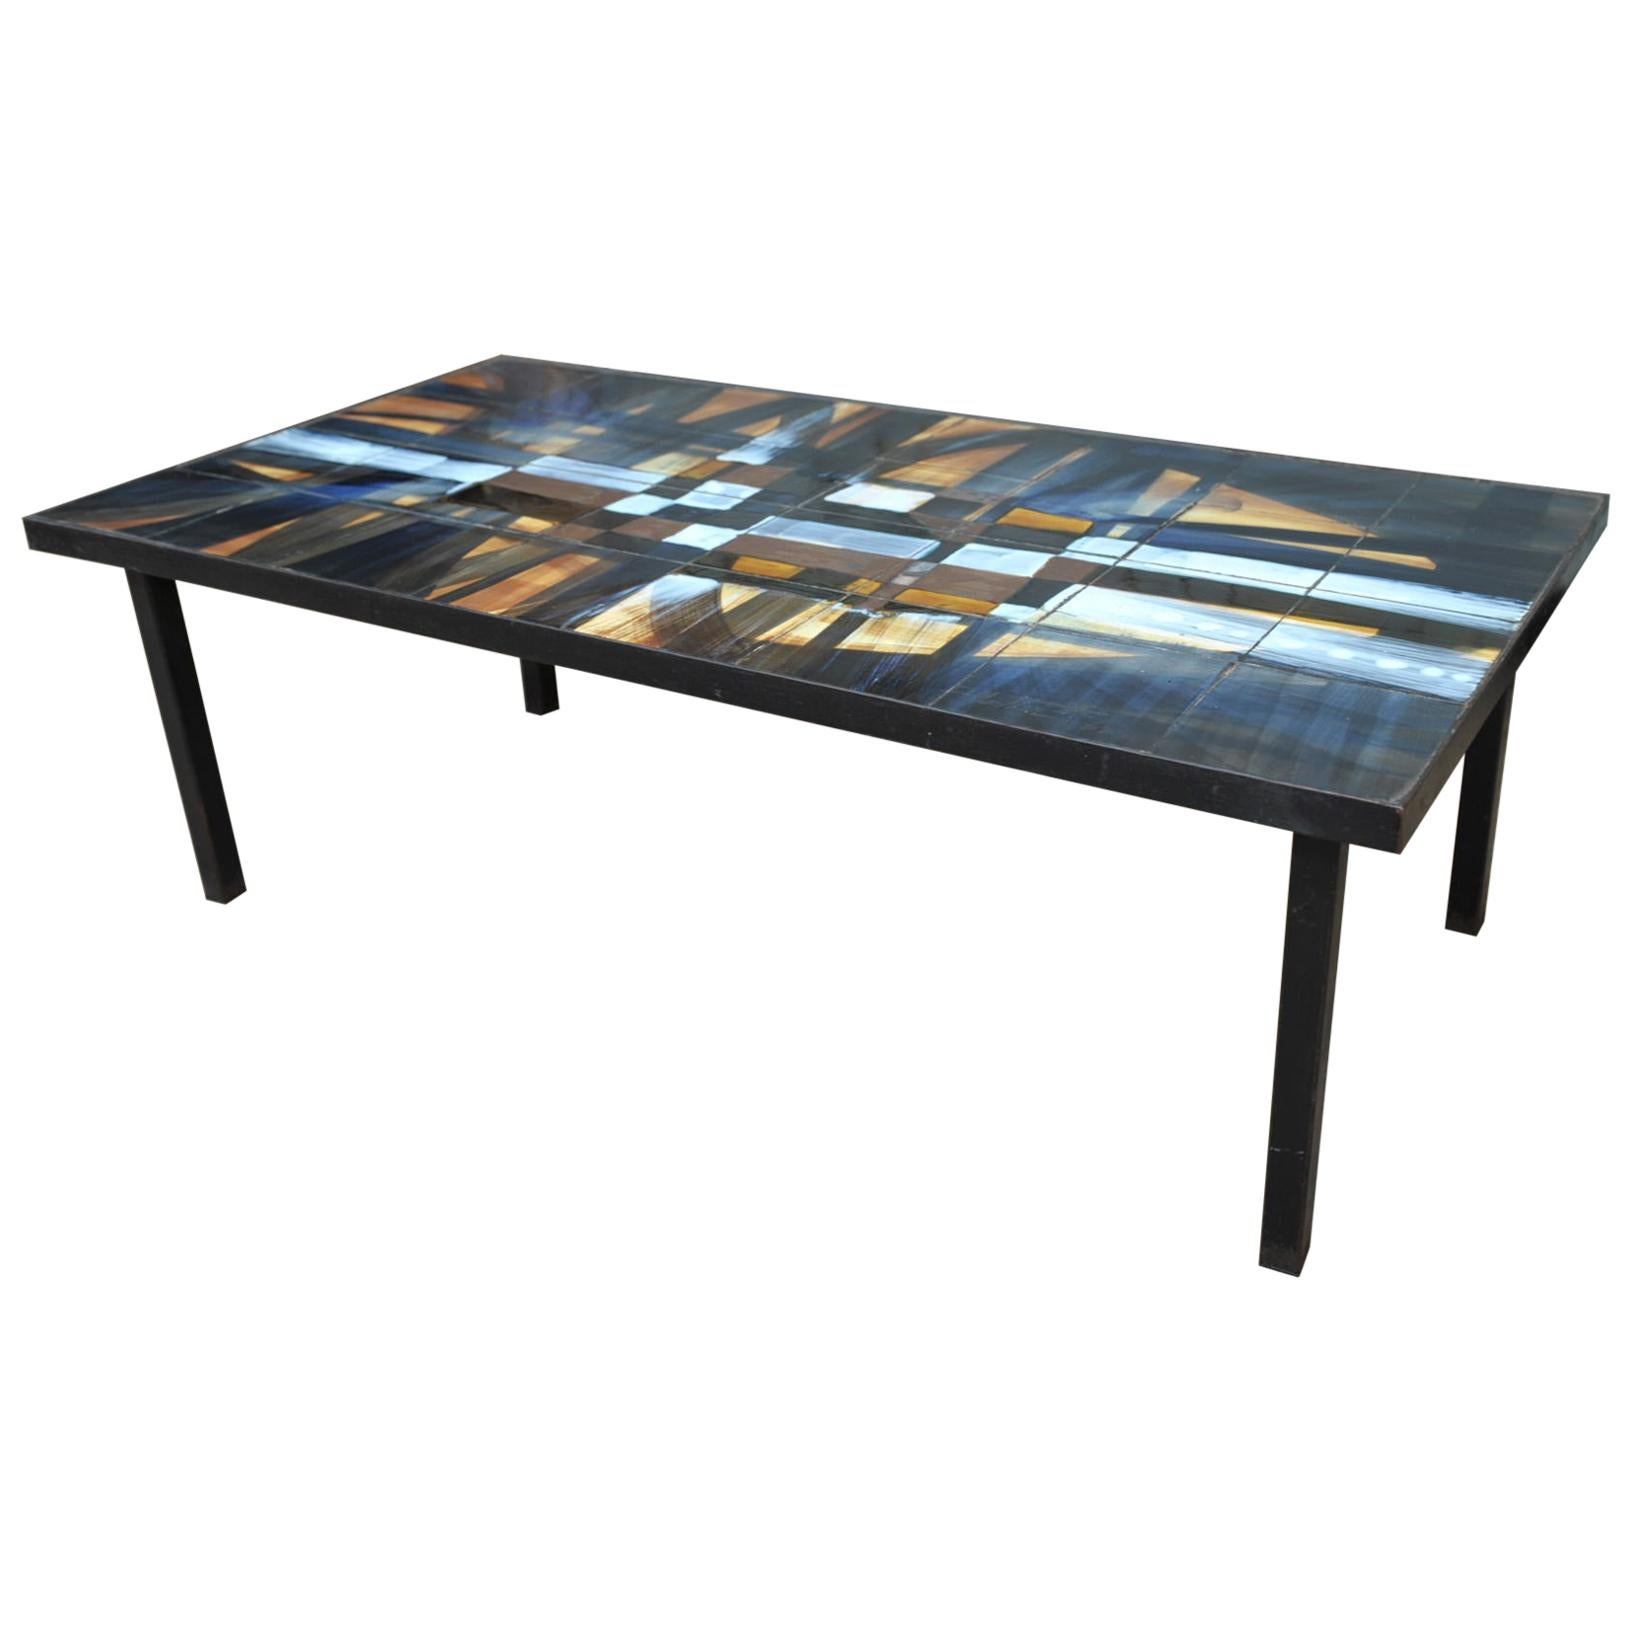 Ceramic Tiles Top Coffee Table by Pelletier, 1966 For Sale